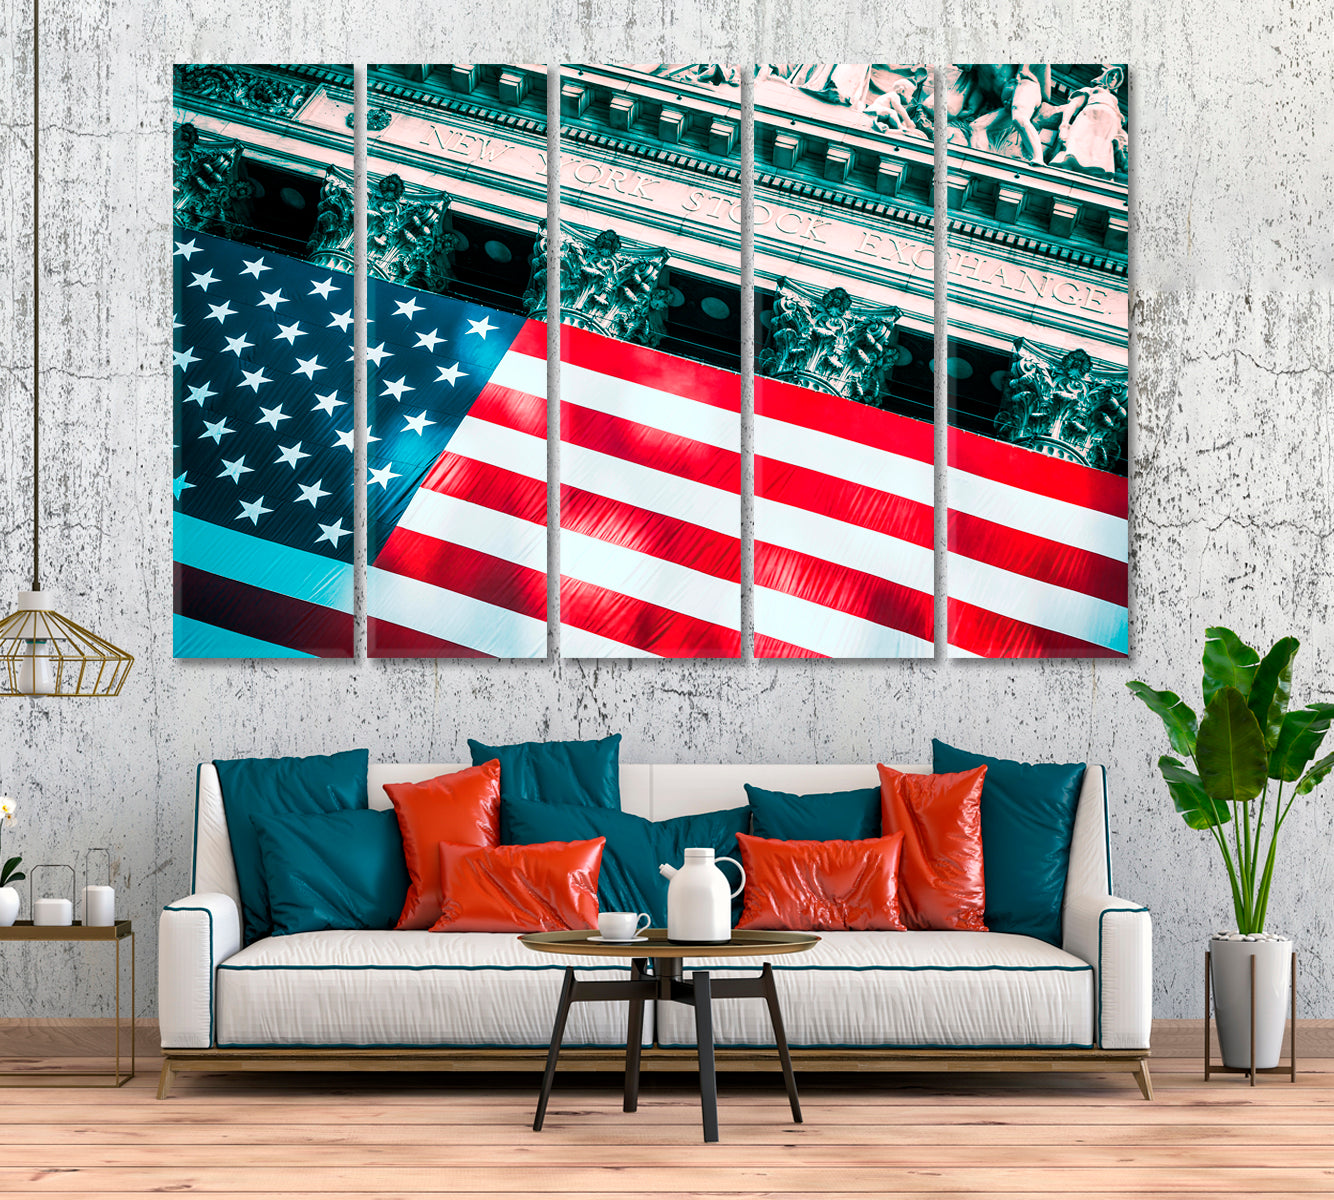 New York Stock Exchange Canvas Print ArtLexy 5 Panels 36"x24" inches 